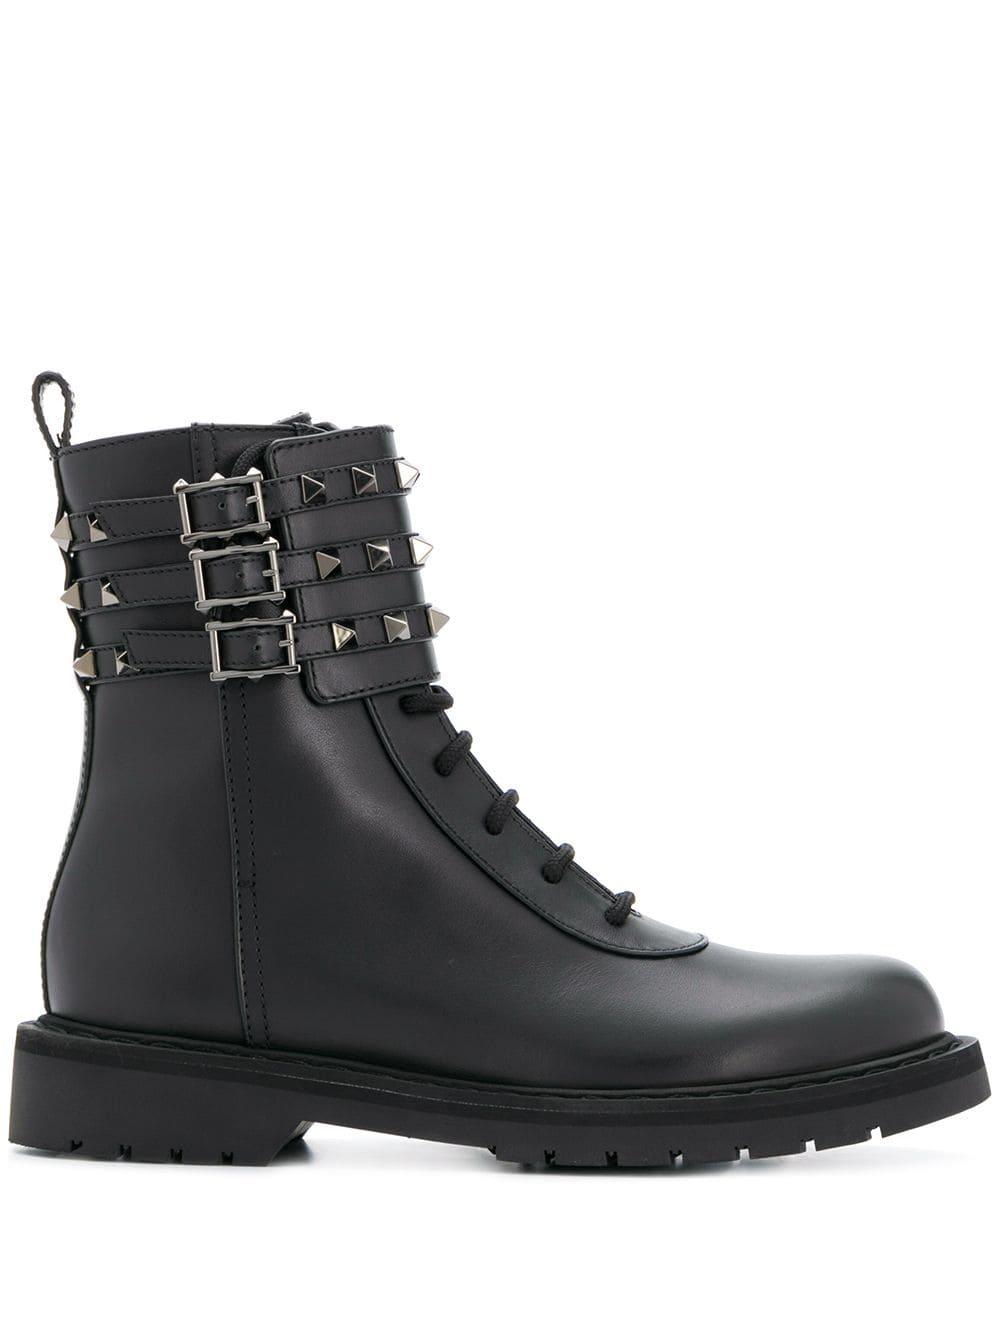 Valentino Leather Tri-band Rockstud Combat Boots in Black - Lyst